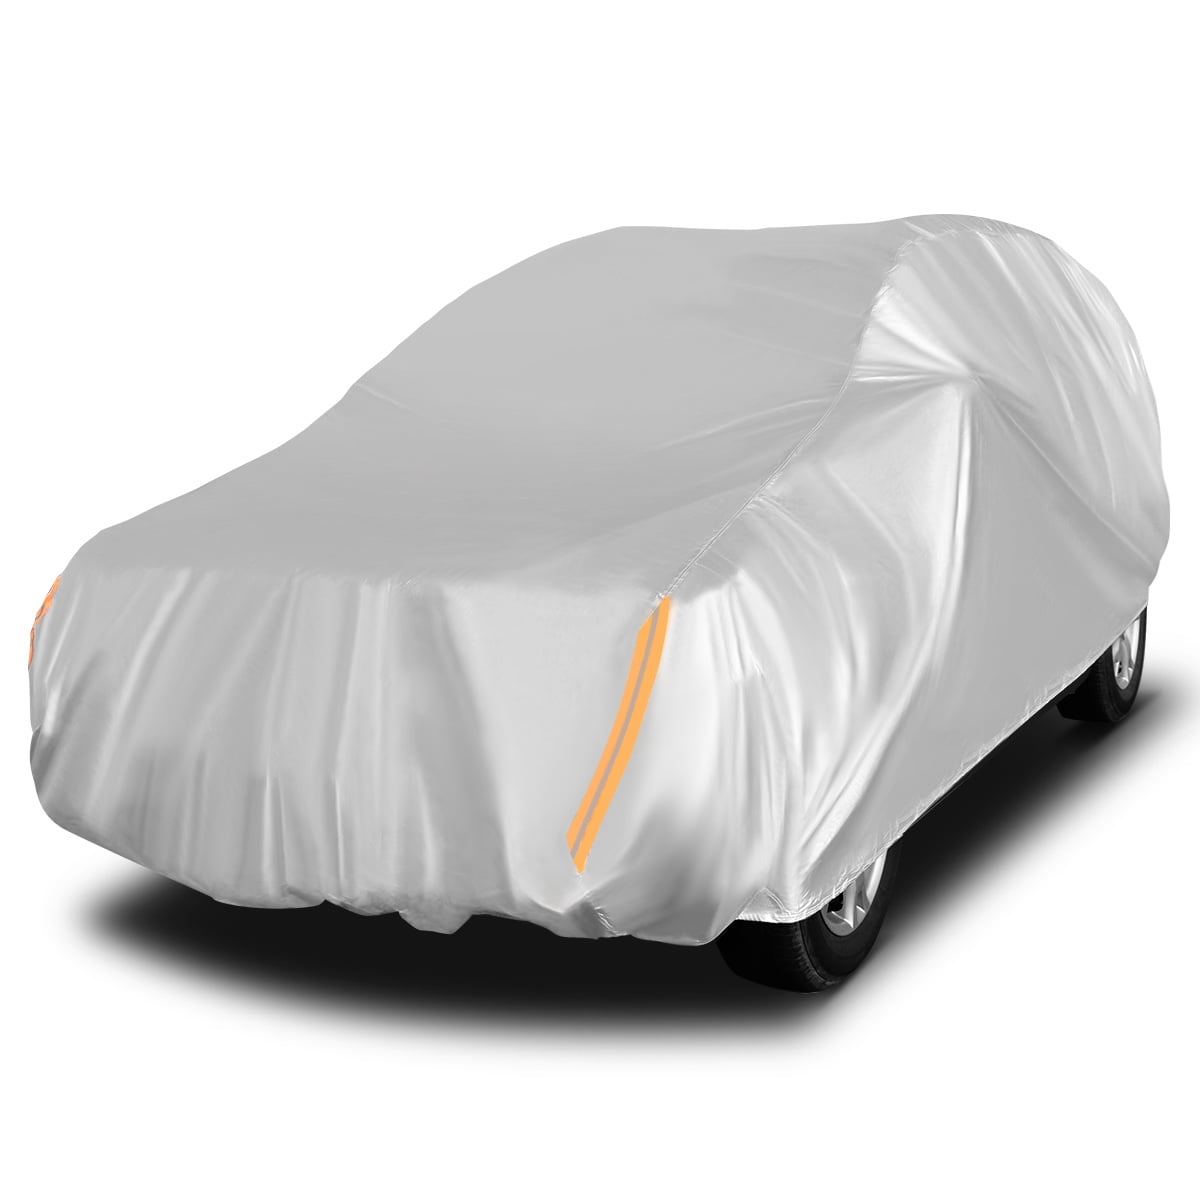 For Infiniti Qx56 5 Layer Car Cover Fitted Water Proof Outdoor Rain Snow Uv Dust